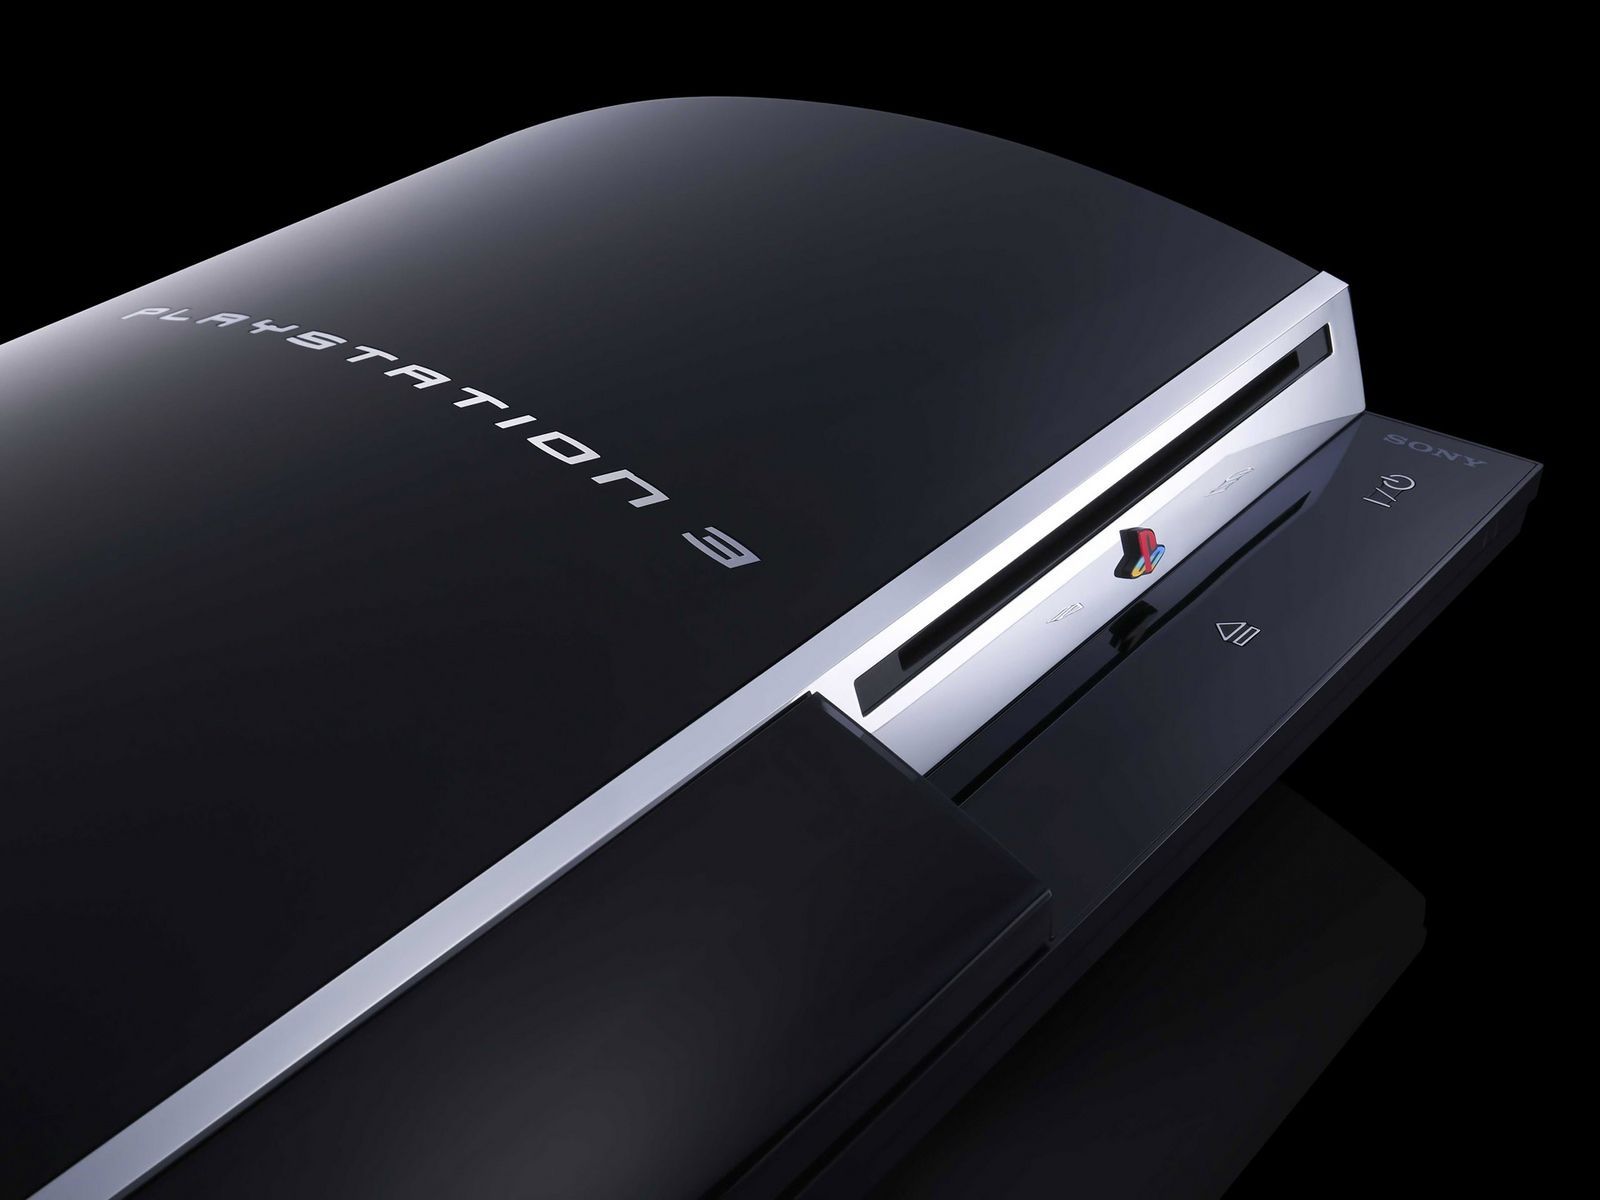 PLAYSTATION 3 Wallpapers | HD Wallpapers